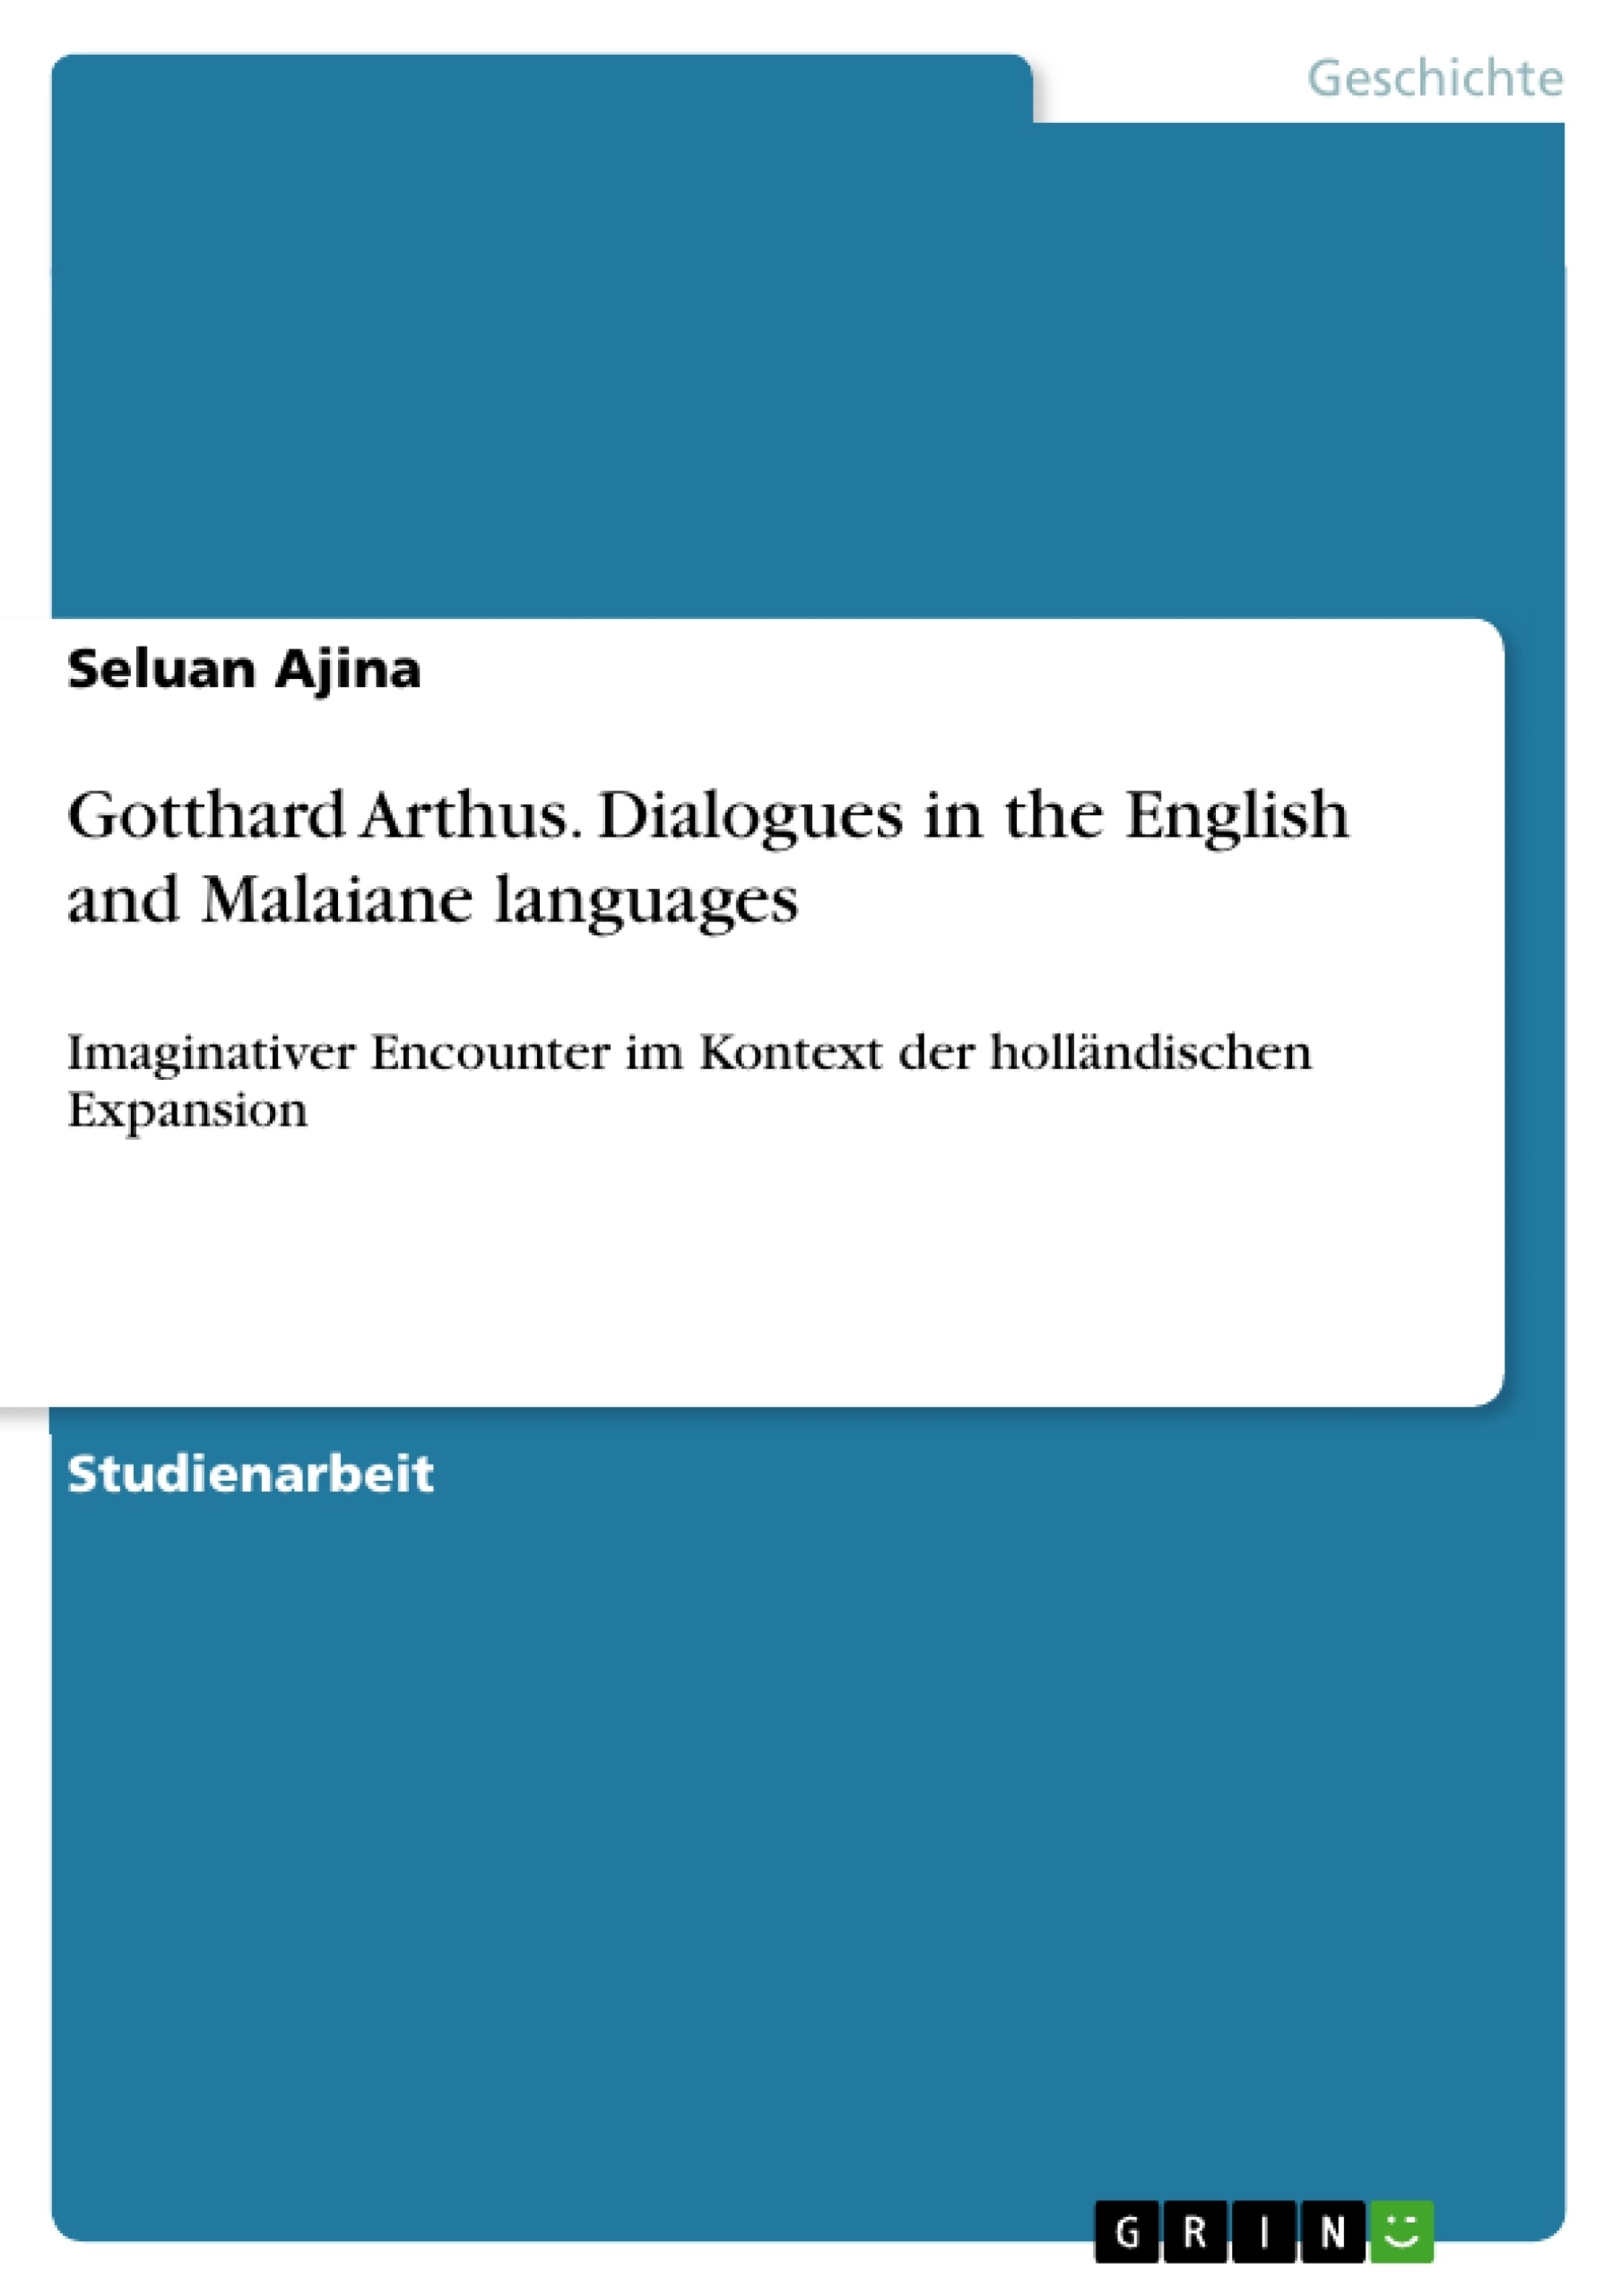 Título: Gotthard Arthus. Dialogues in the English and Malaiane languages